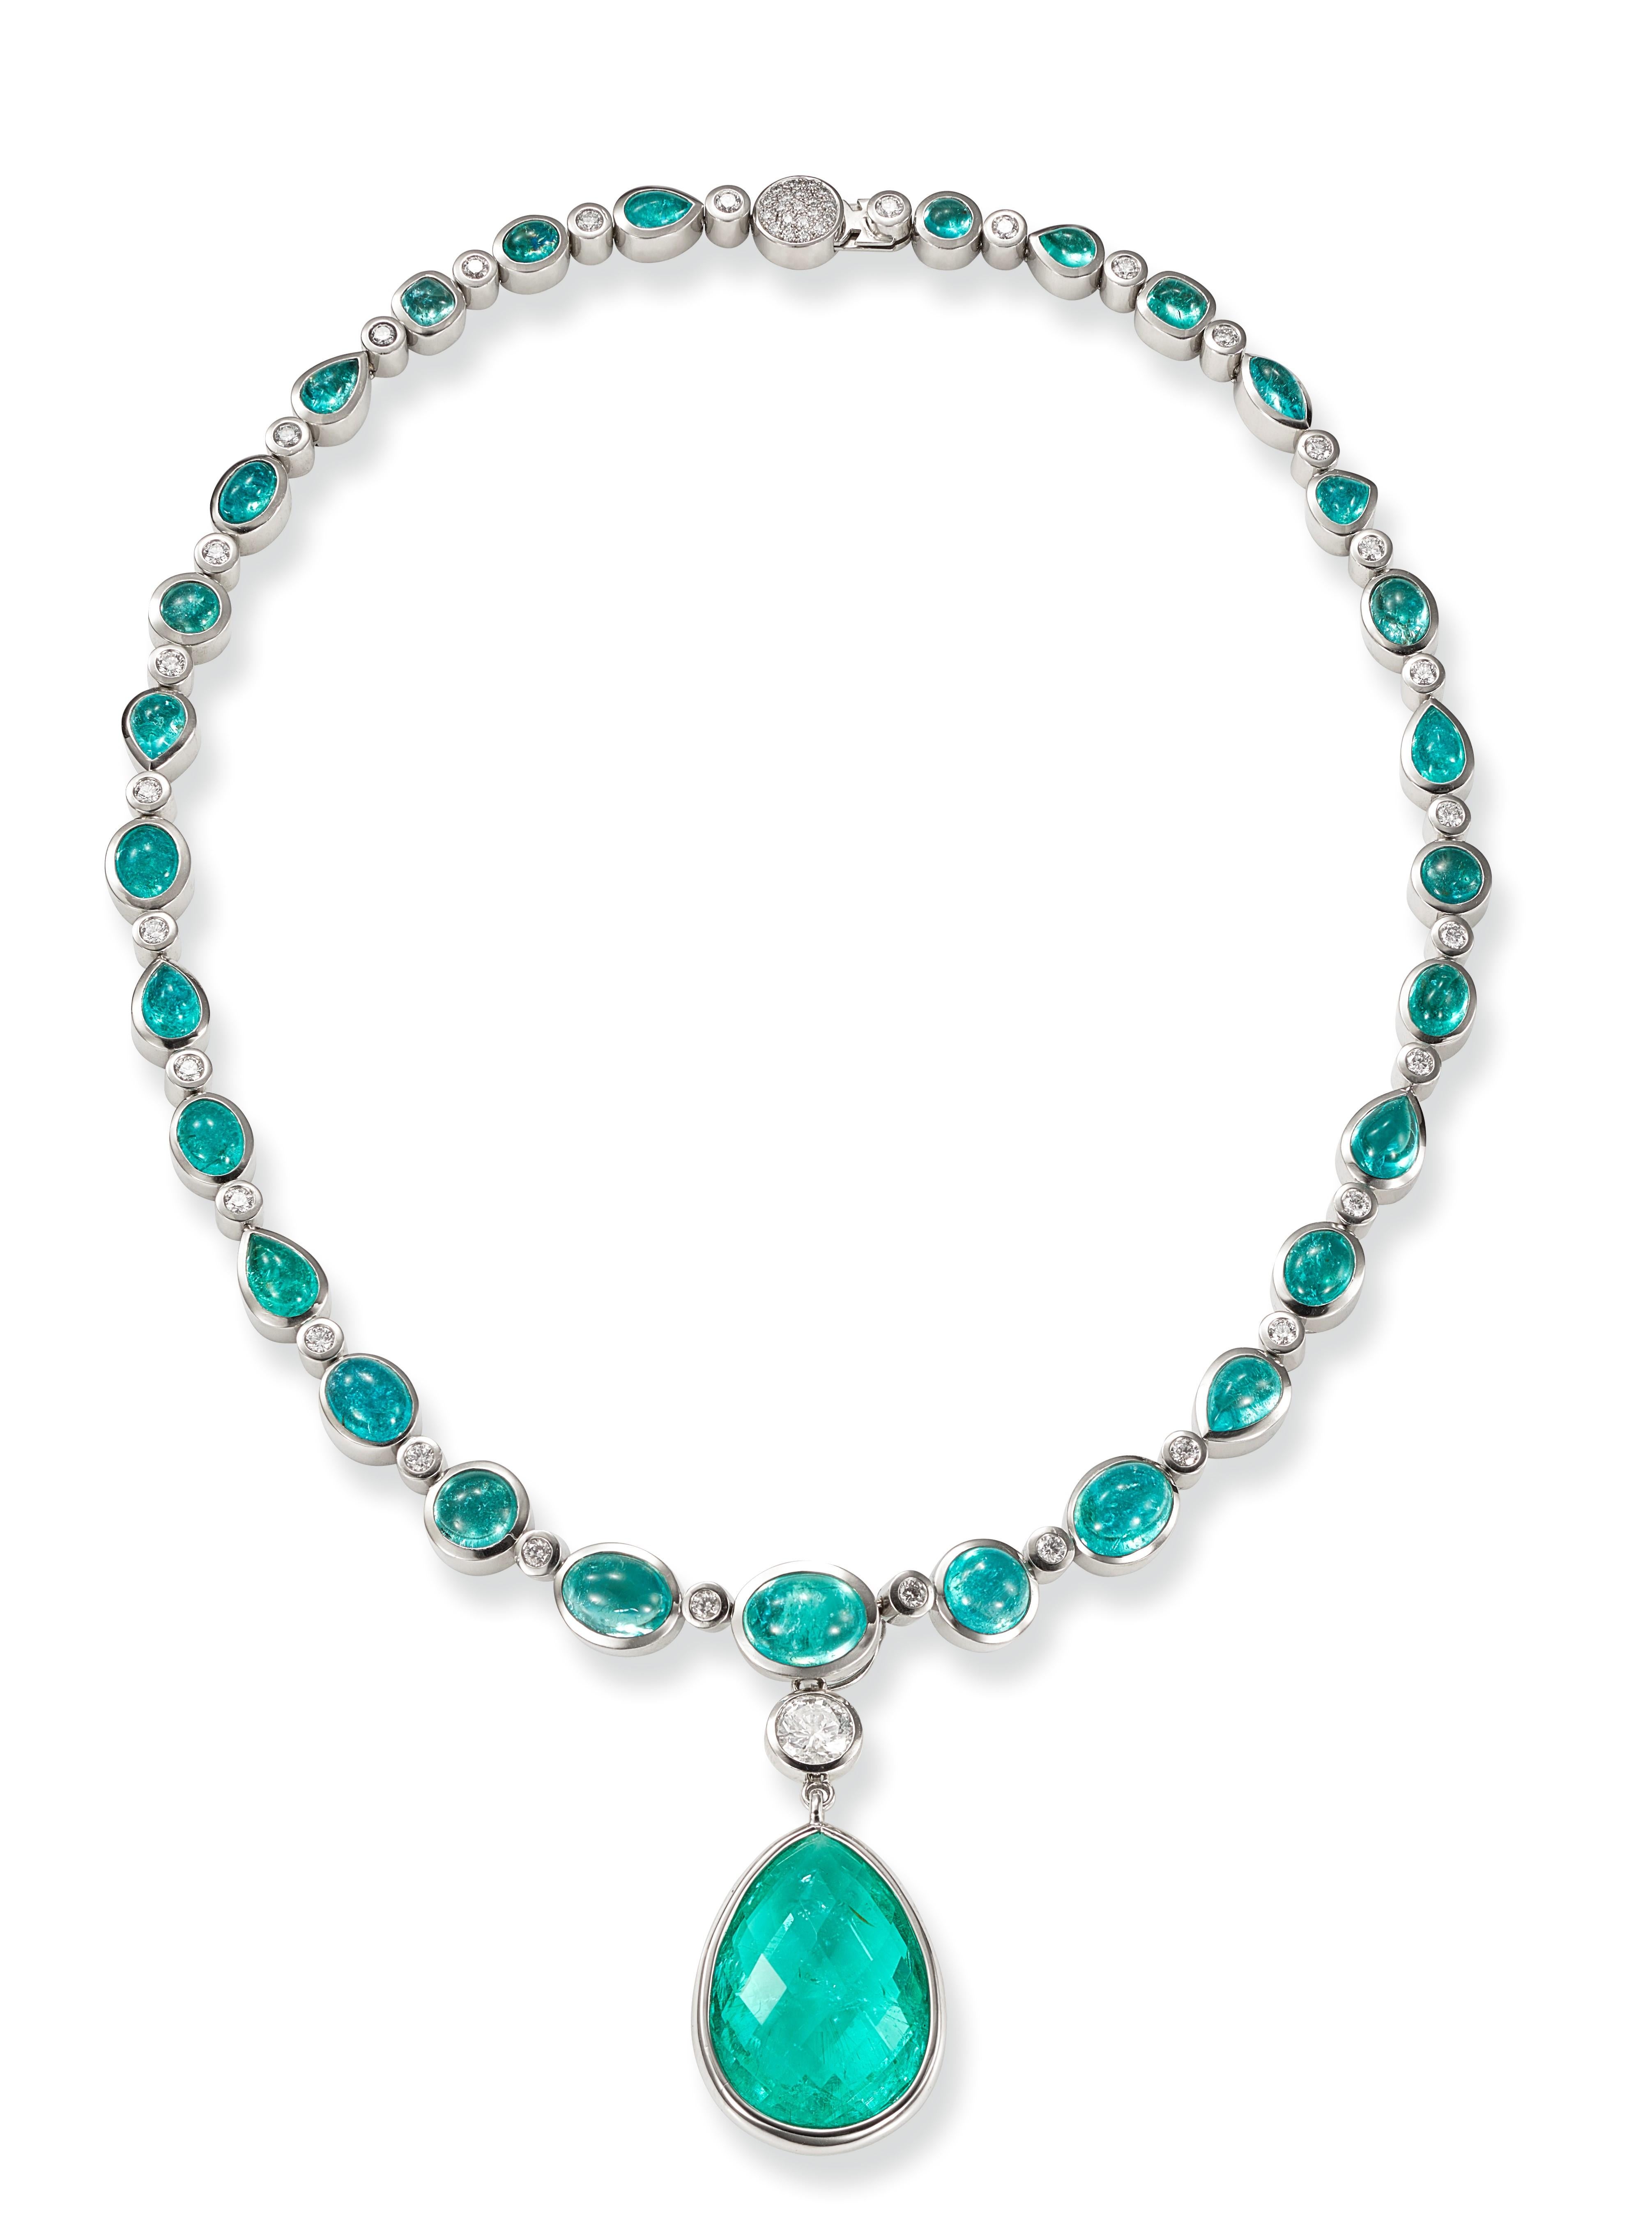 This 950/ Platinum (99.15g) Collier is set with 29 fine Paraiba Tourmalines Cabouchons, various shapes, 49.23ct + 46x Diamonds (Brilliant-cut, D/VS, round, 1.2-2.5mm, 2.75ct).

Paraiba Tourmalines are very rare gemstones. The color is electric neon